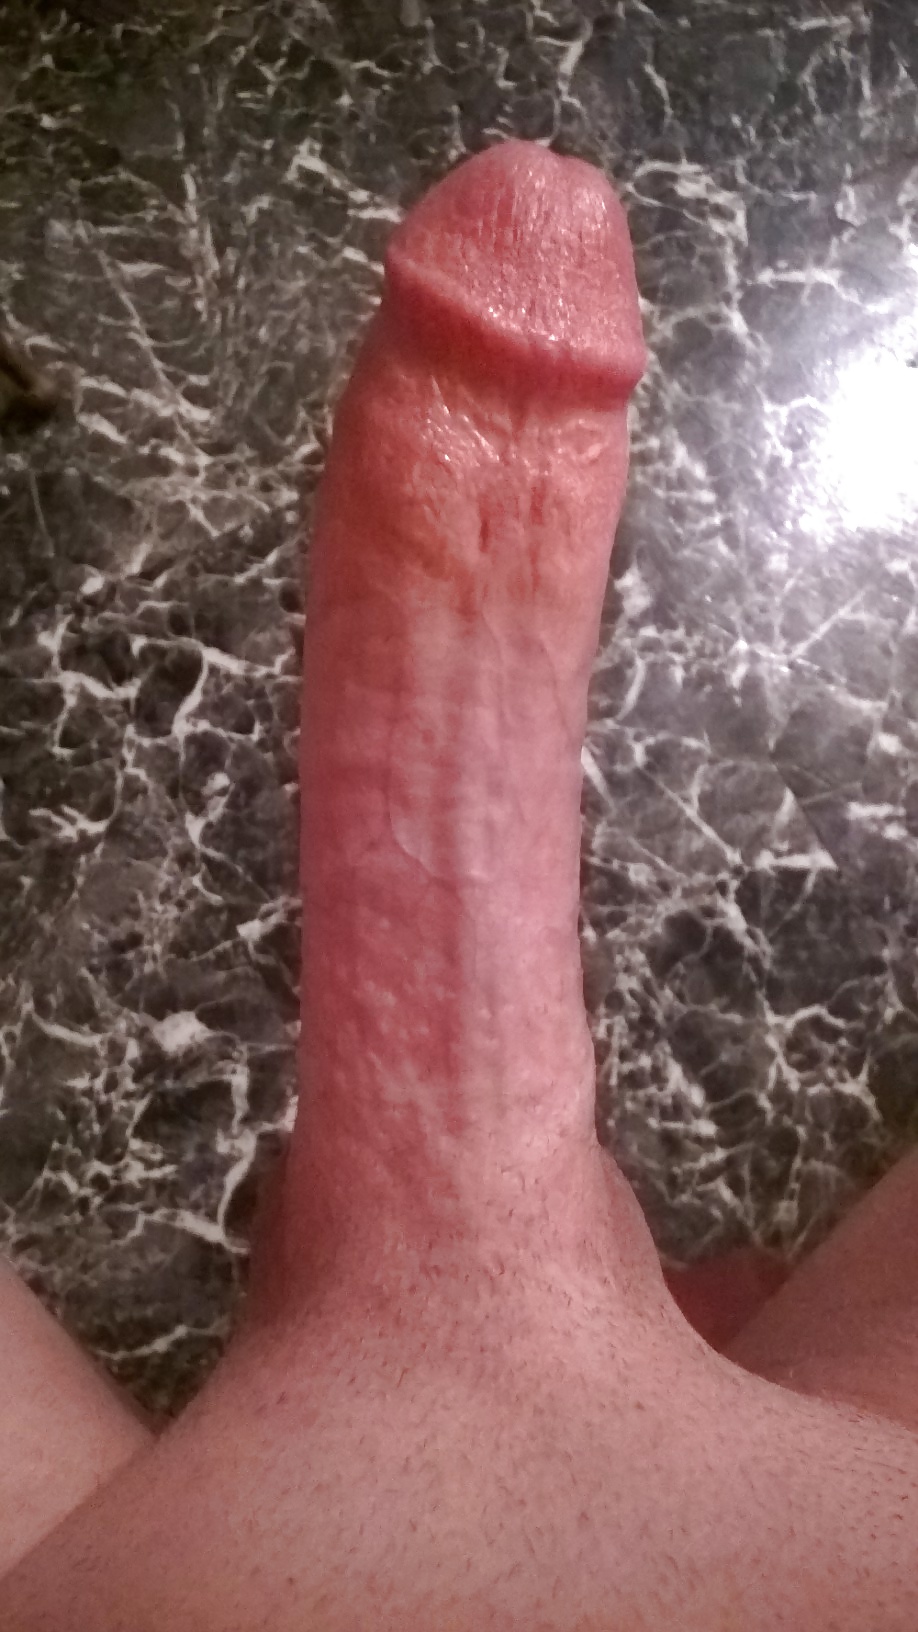 My dick after a close shave #29257958